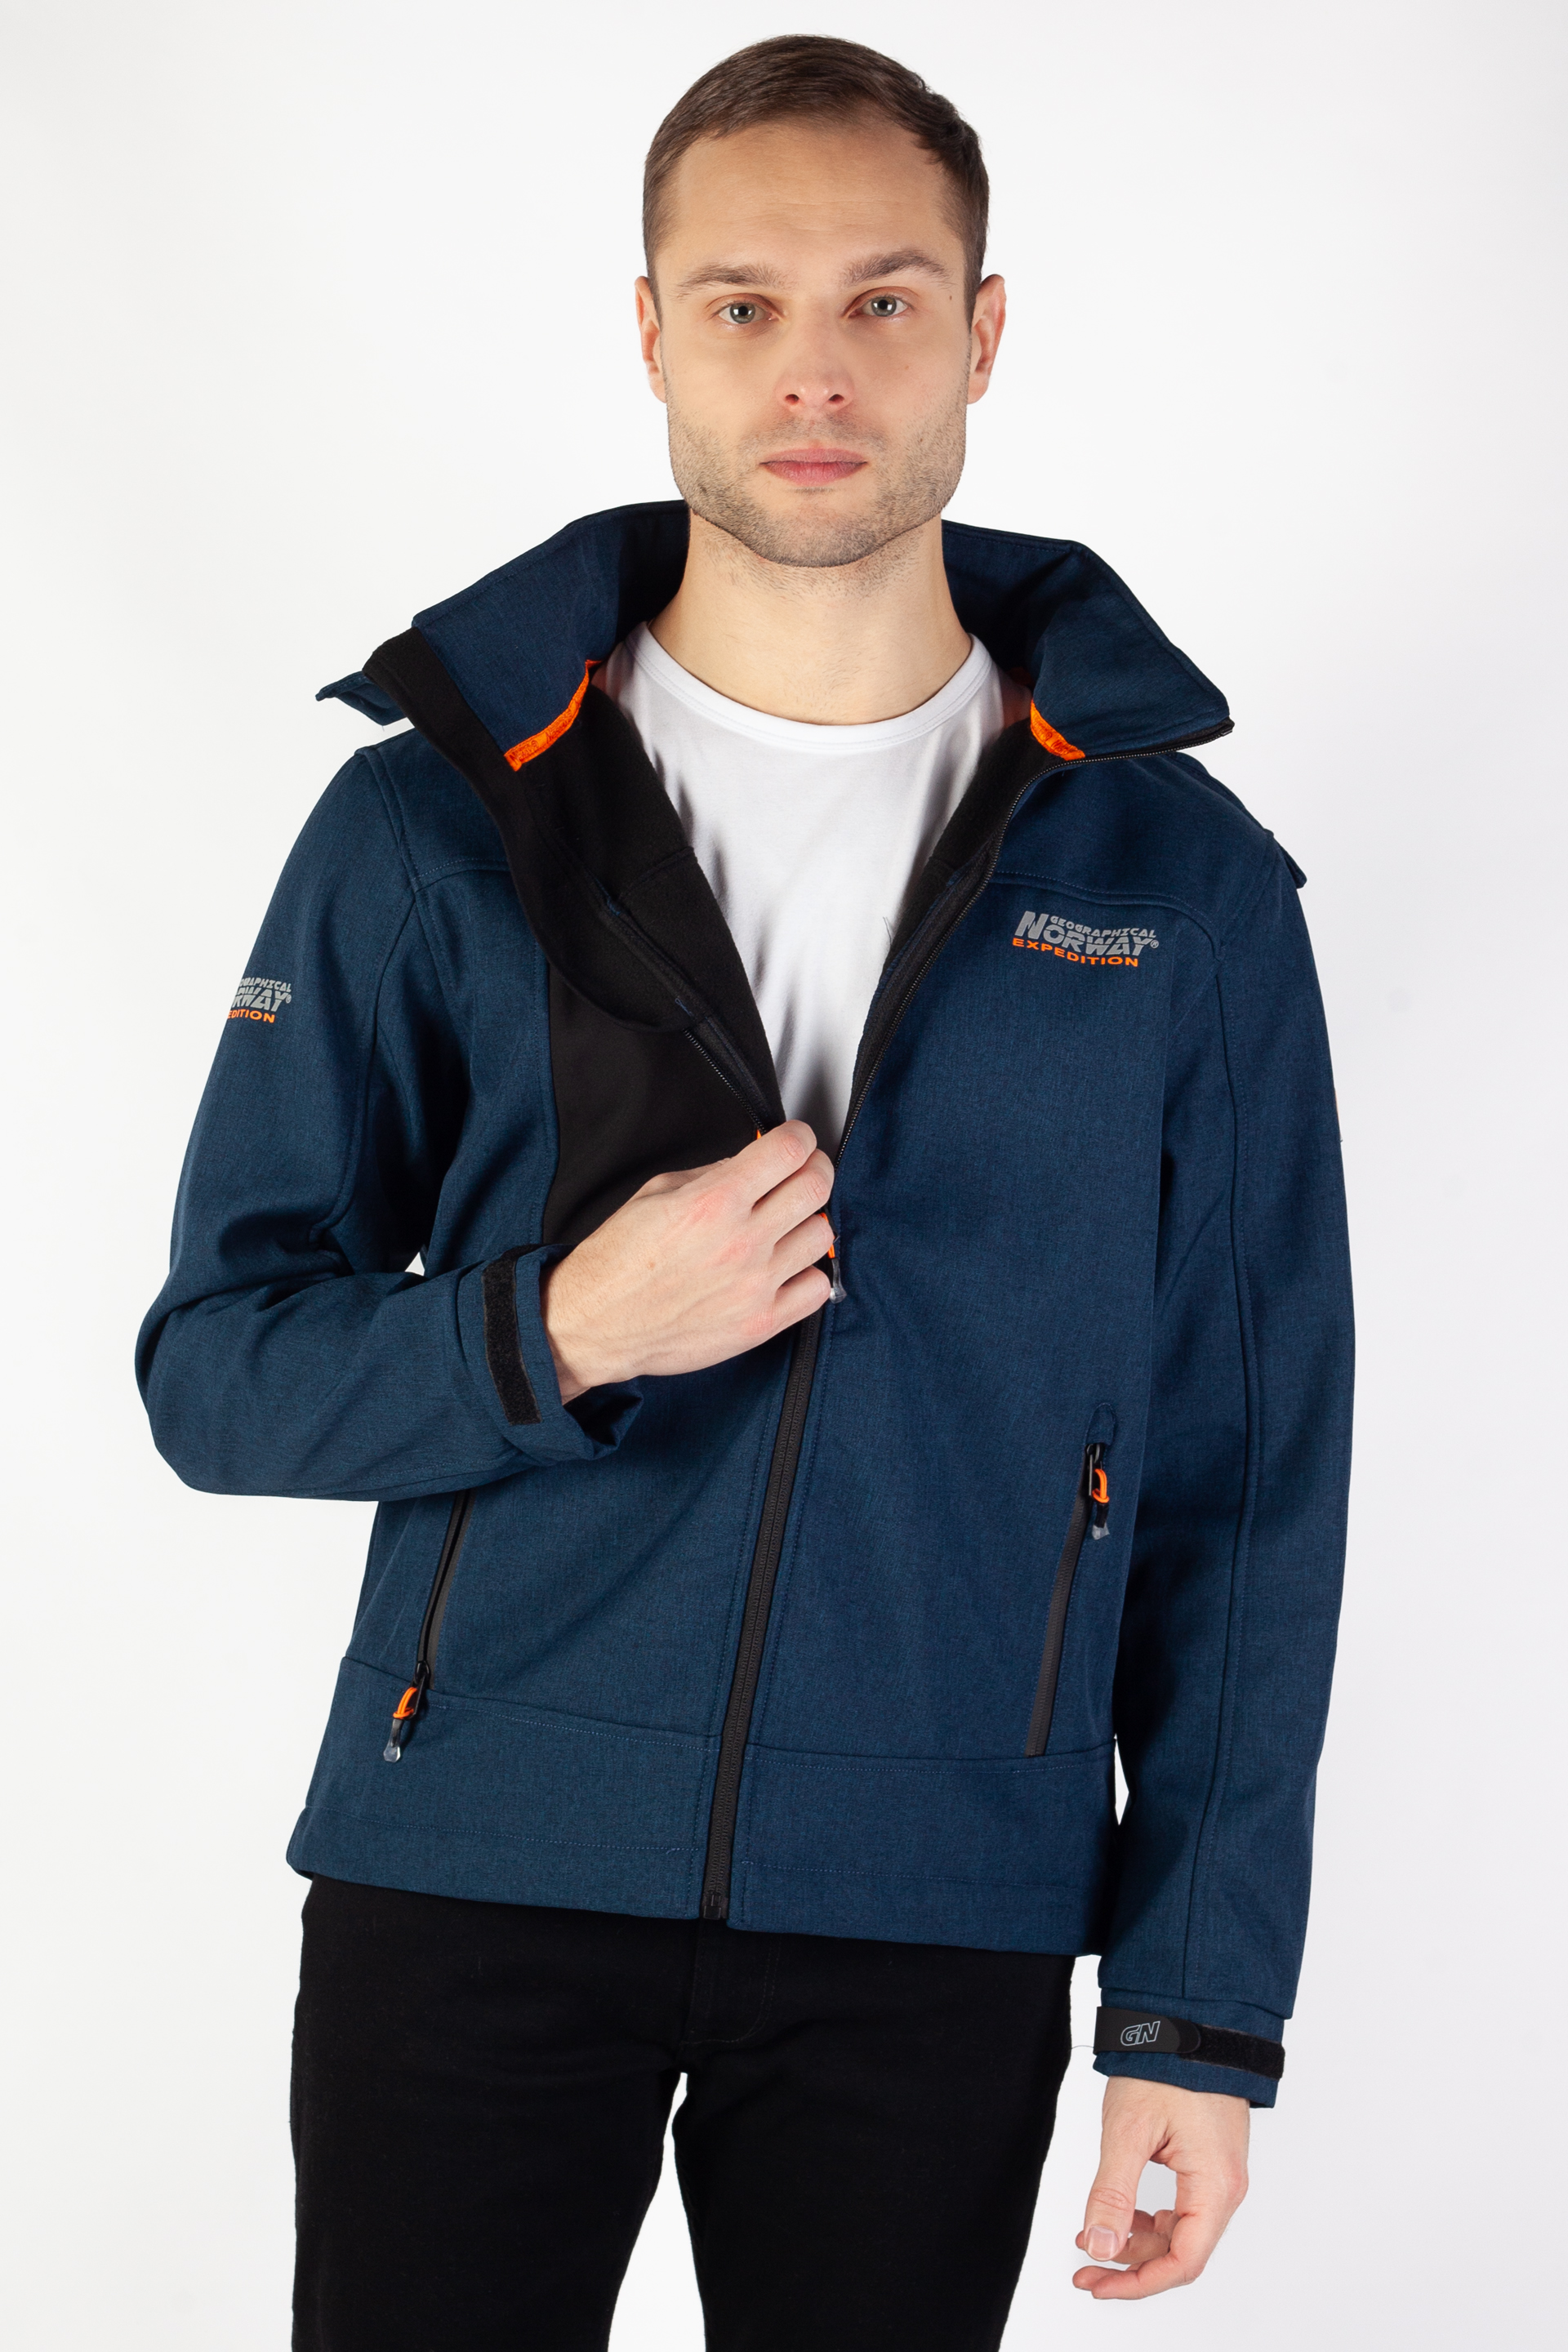 Jacke GEOGRAPHICAL NORWAY TOREFACT-Navy